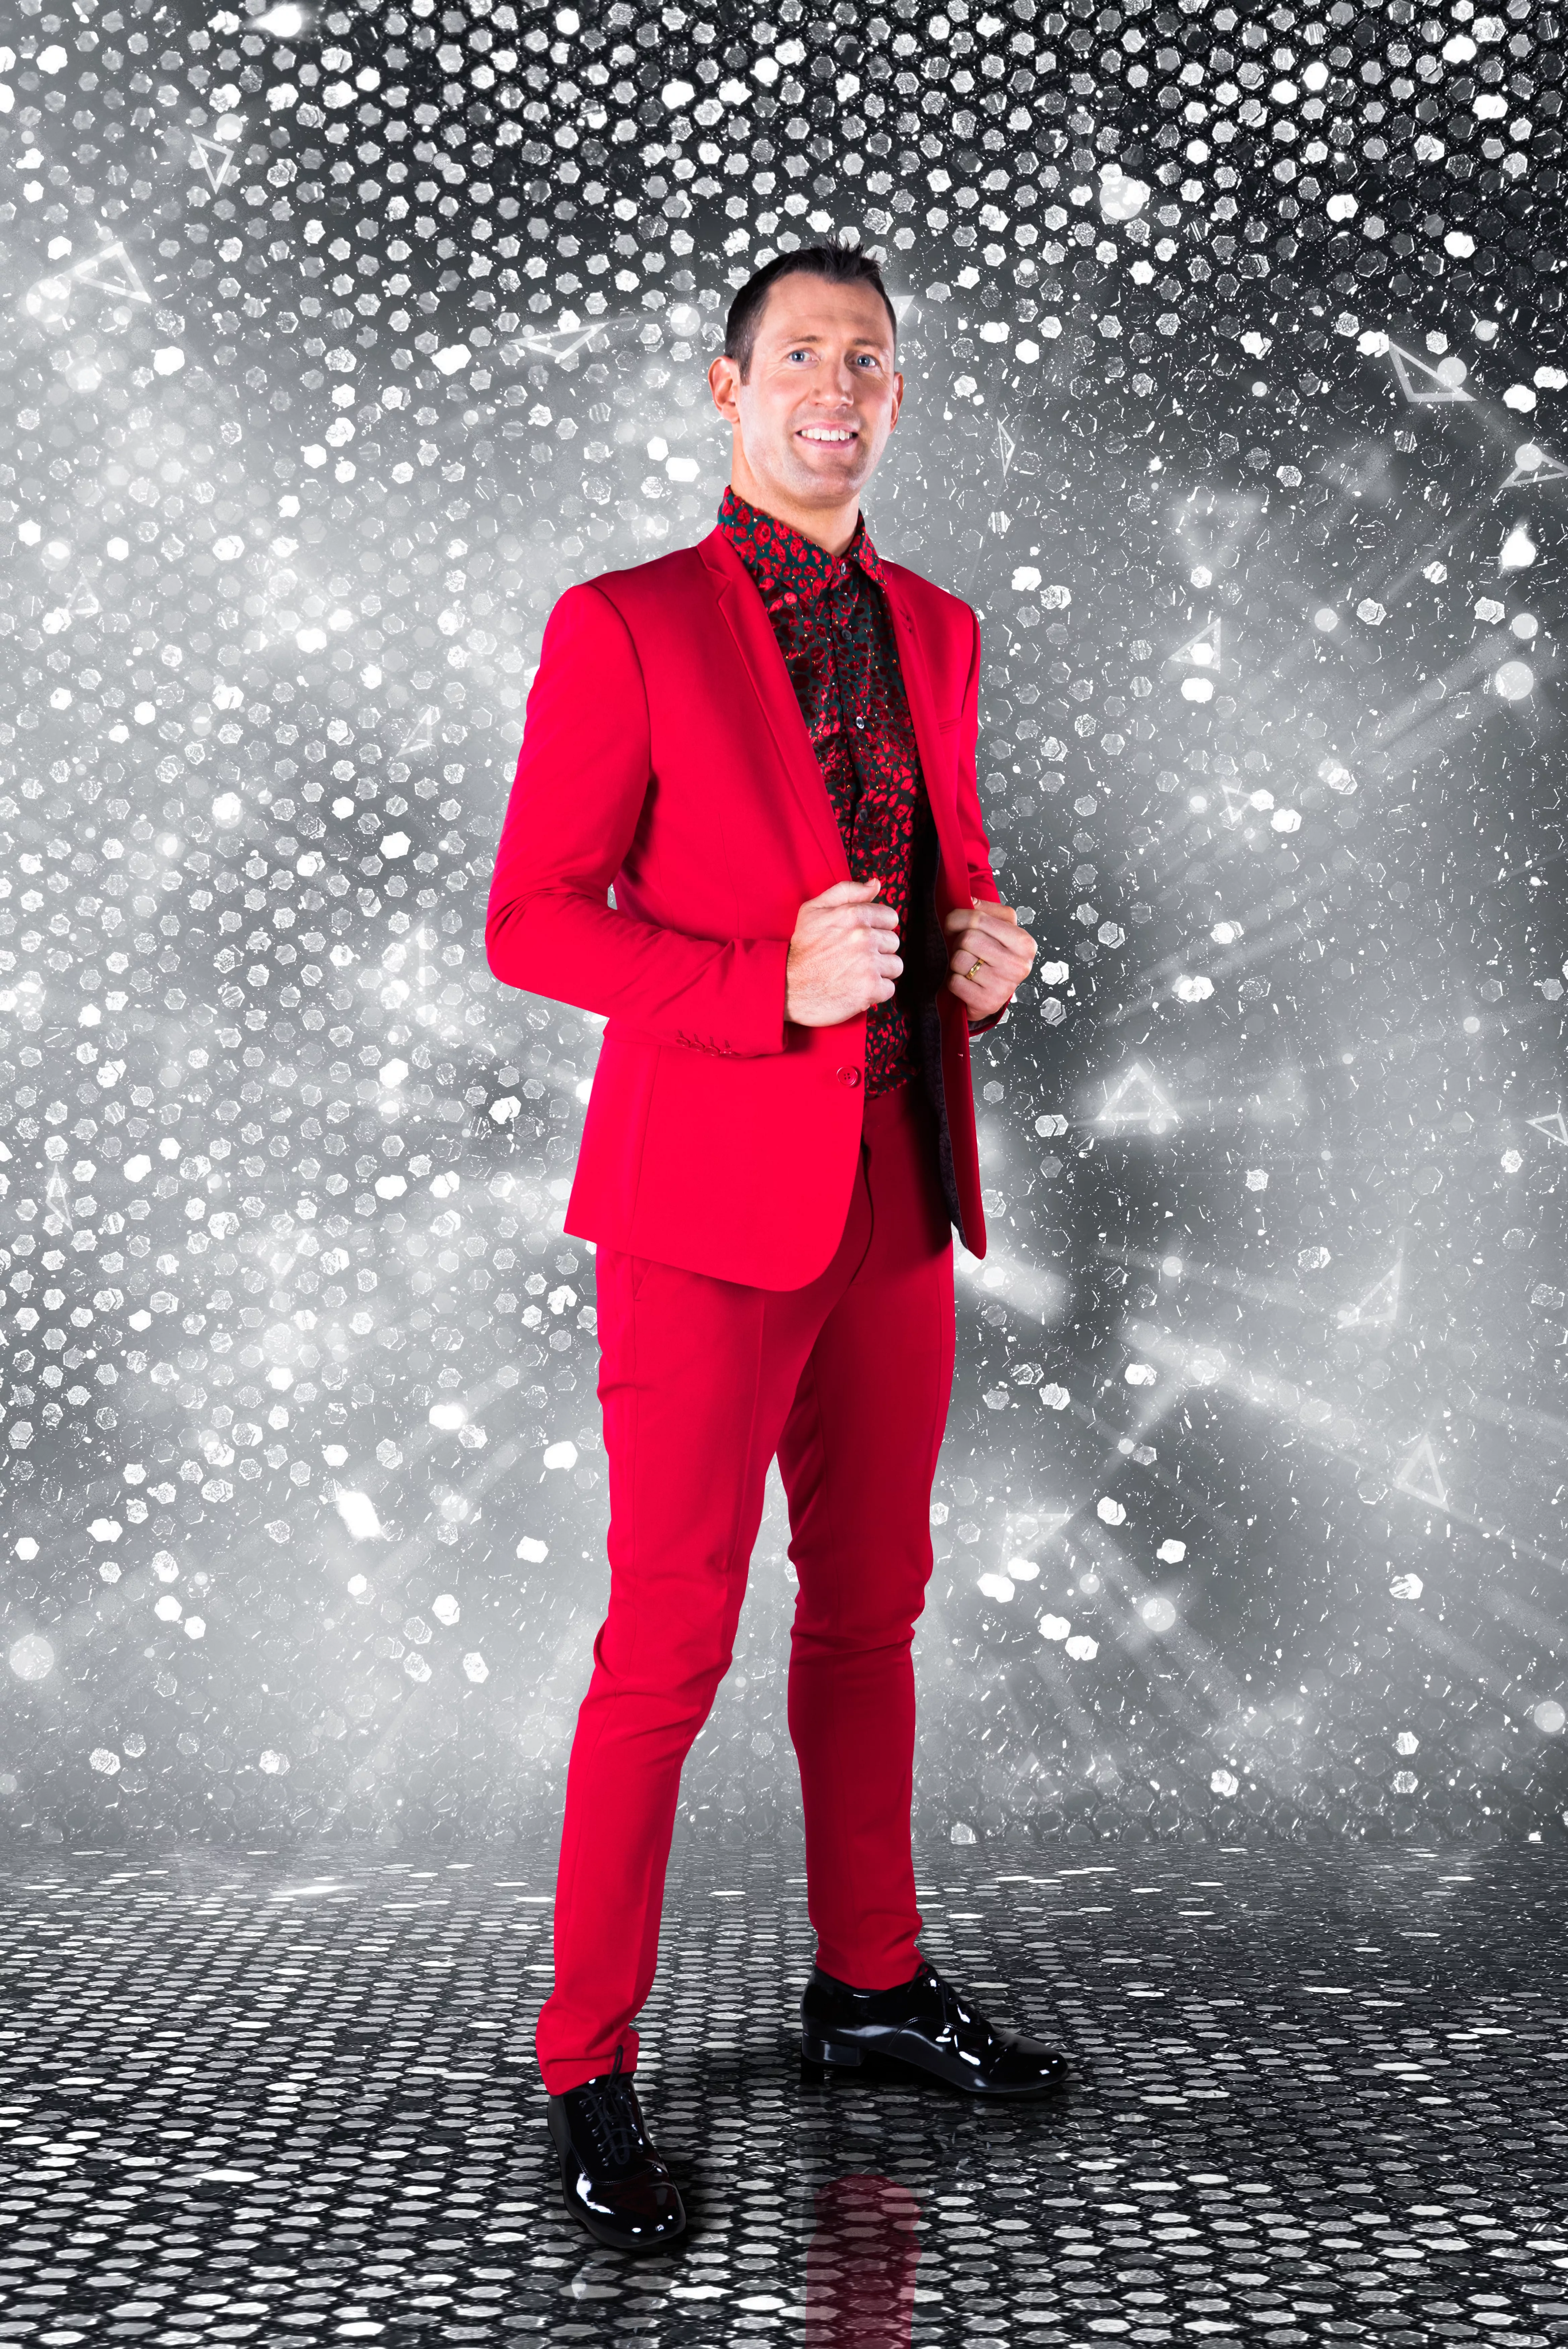 Dublin footballer announced as seventh Dancing with the Stars contestant